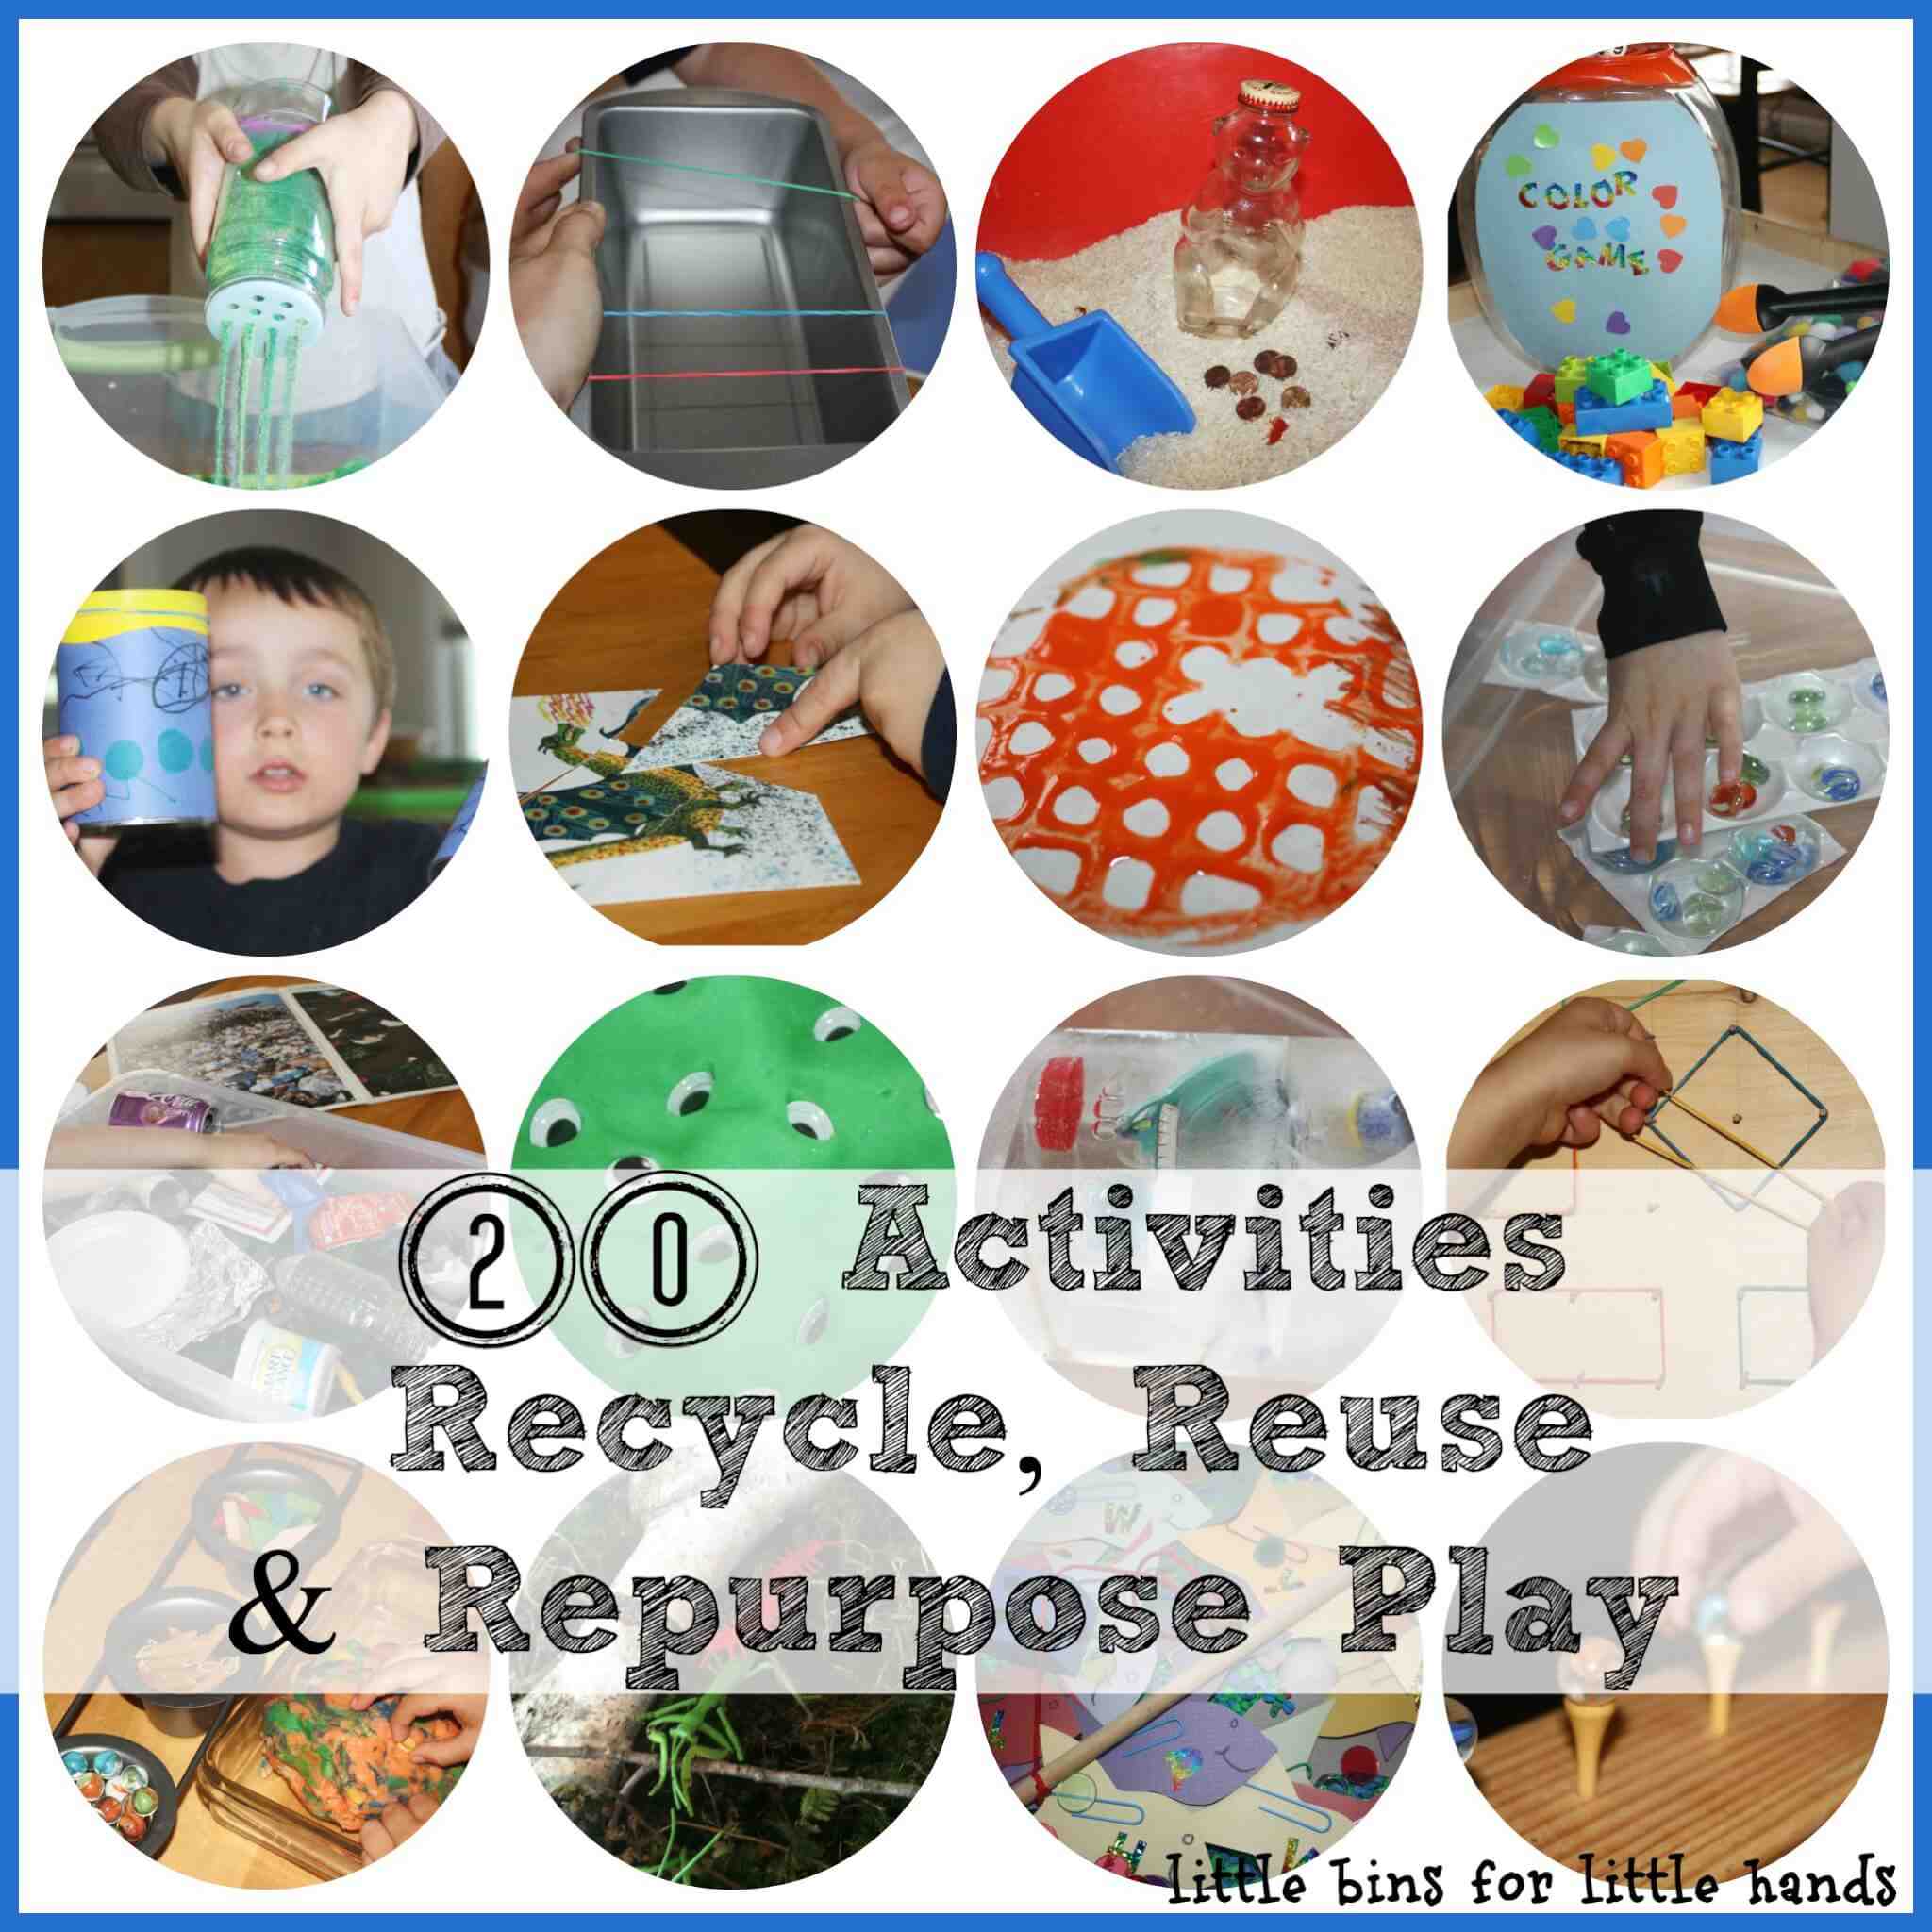 Is recycling a repurpose?